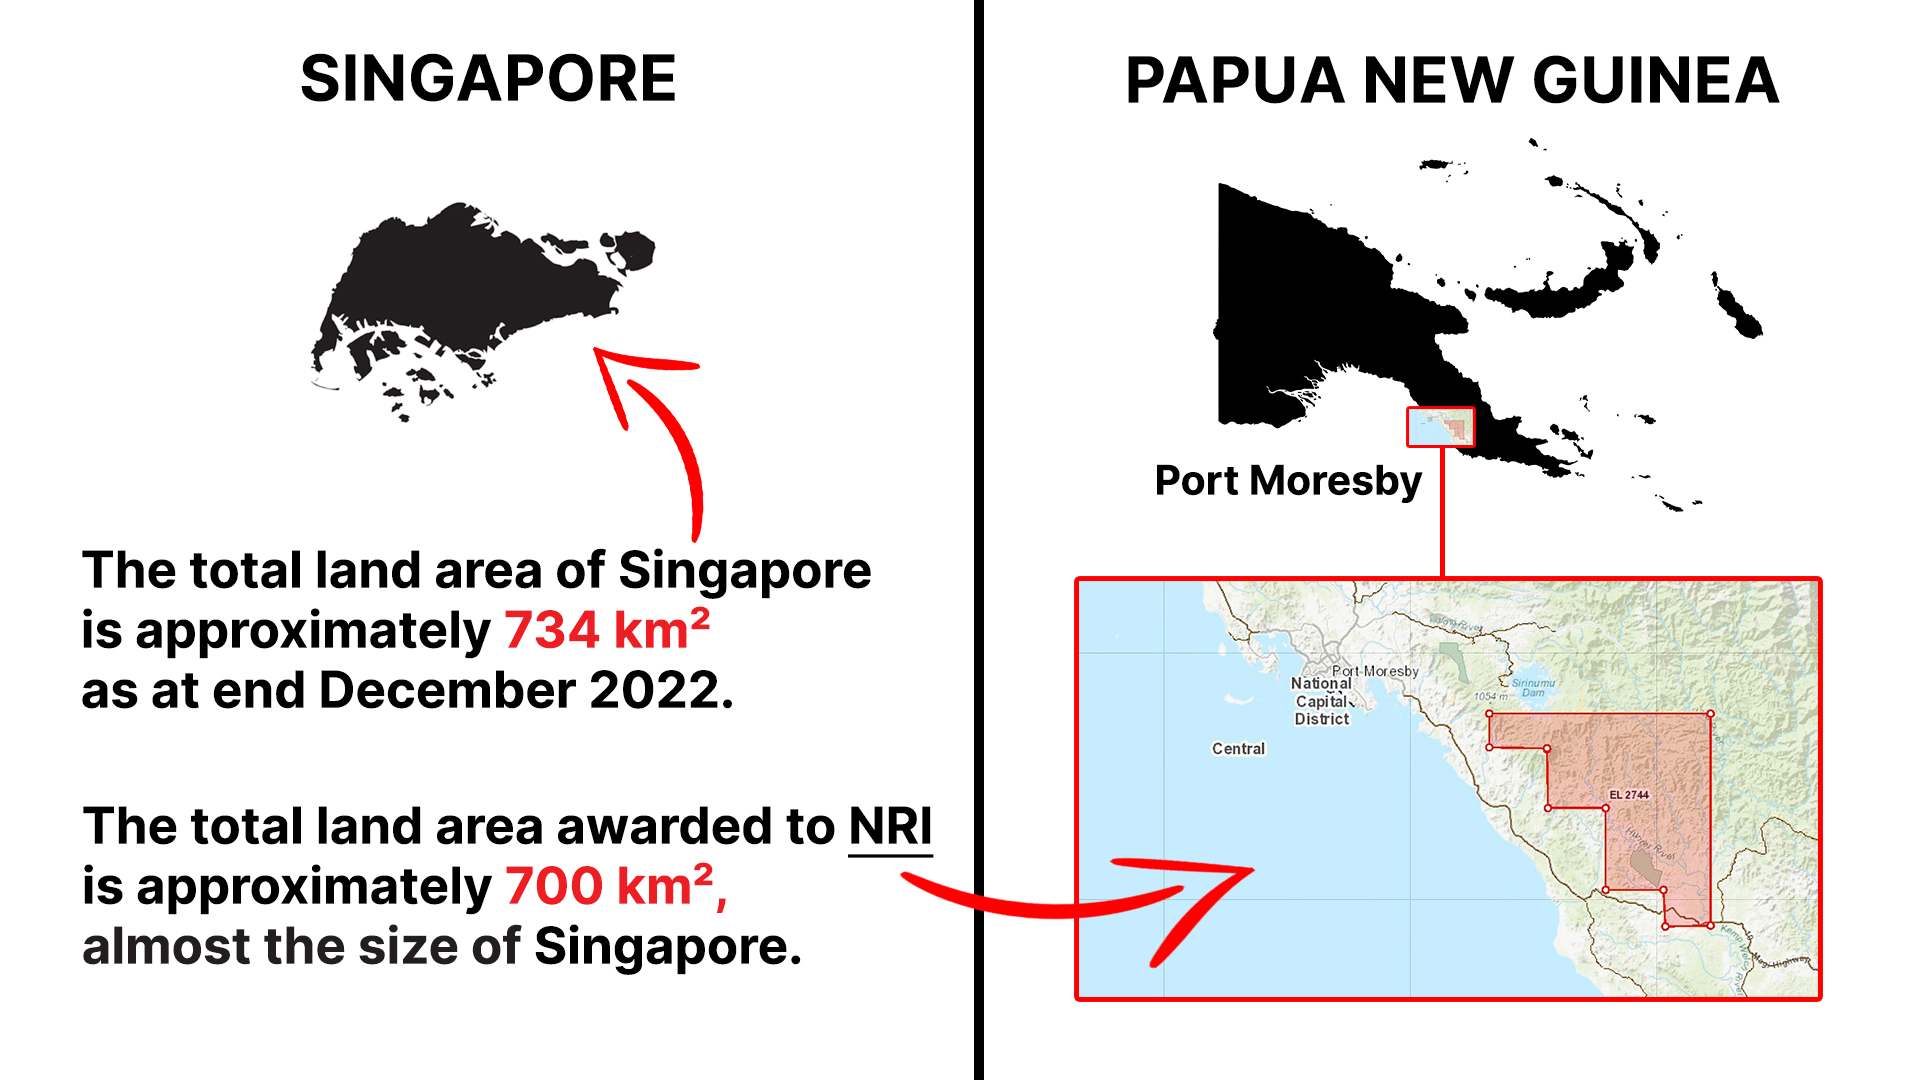 Comparison between the total land area of Singapore vs total land area of NRI’s mining concession.